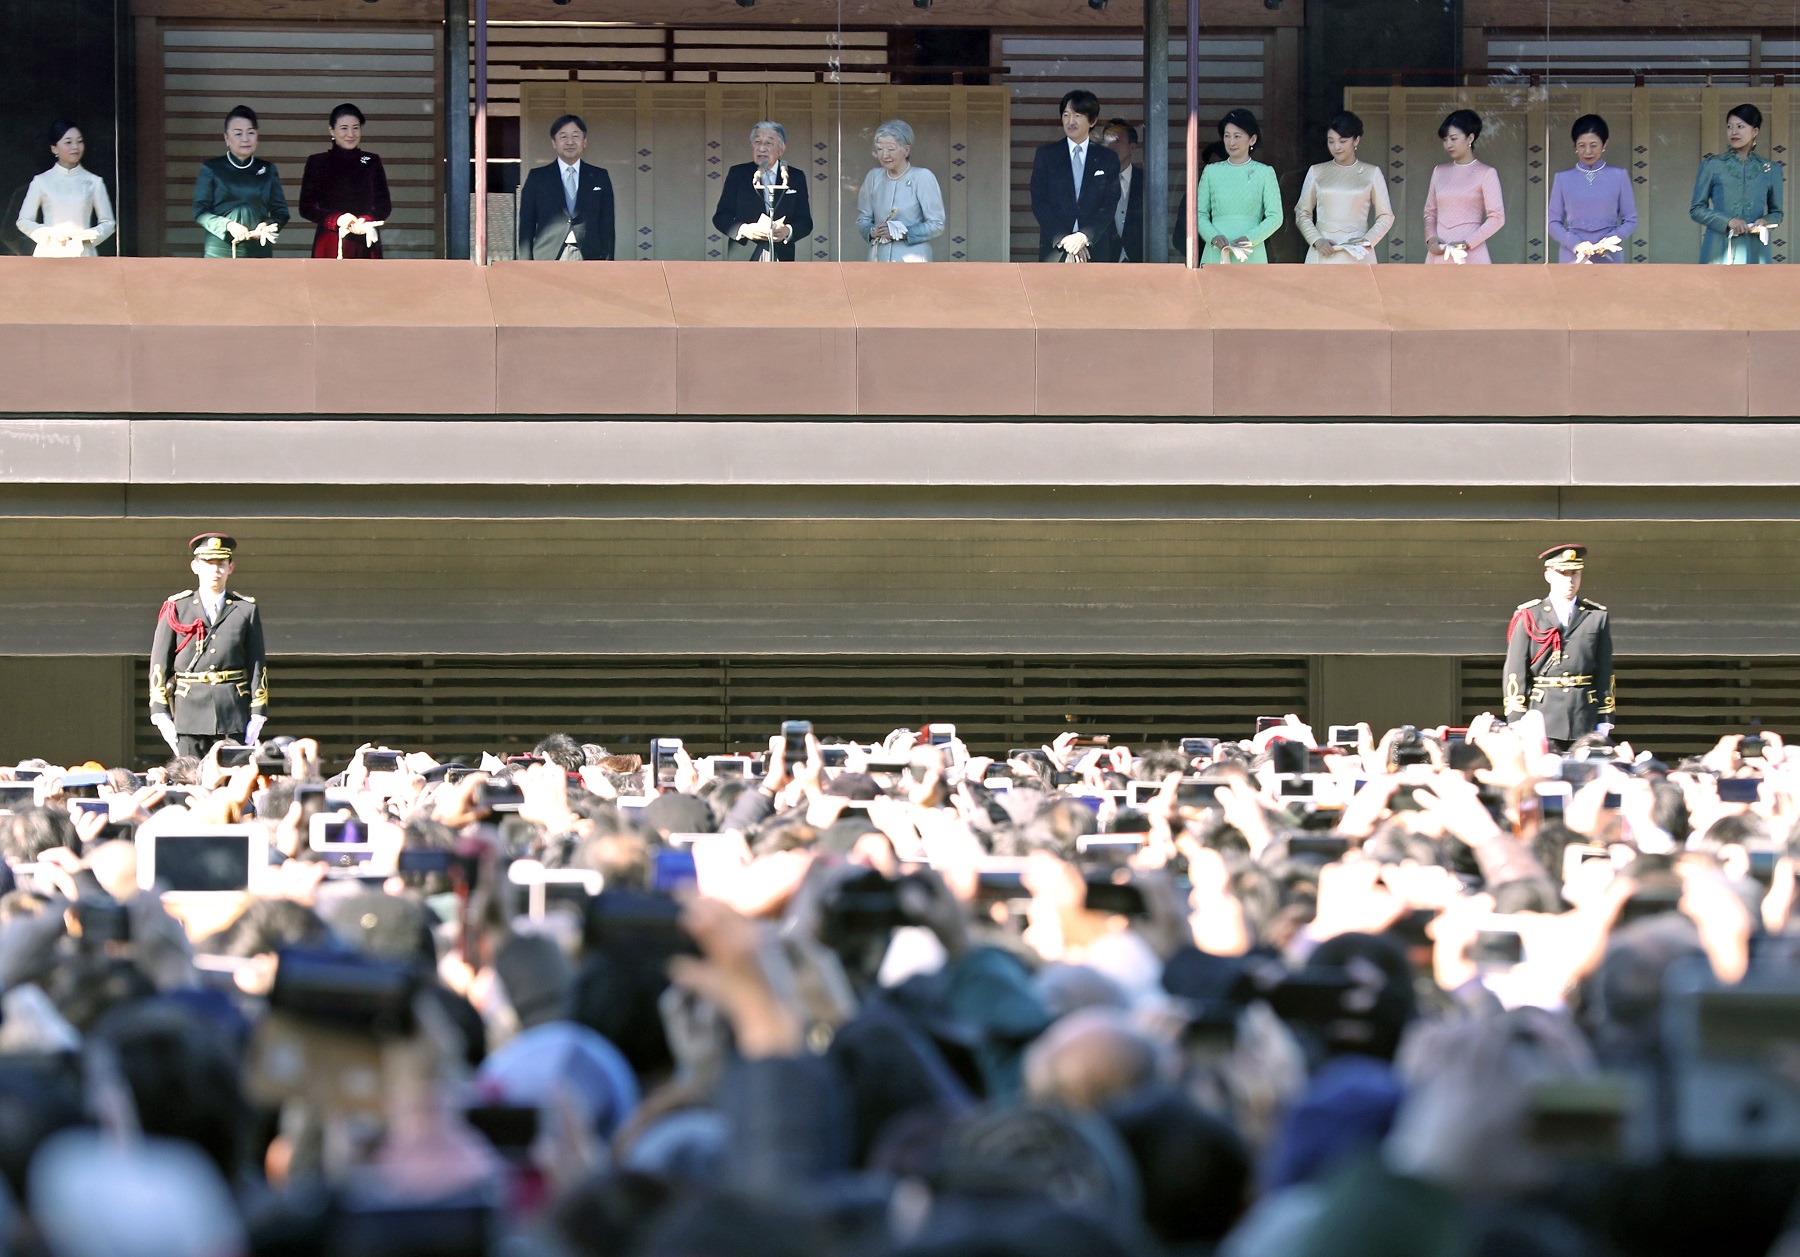 The Japanese Emperors Role in the 21st Century